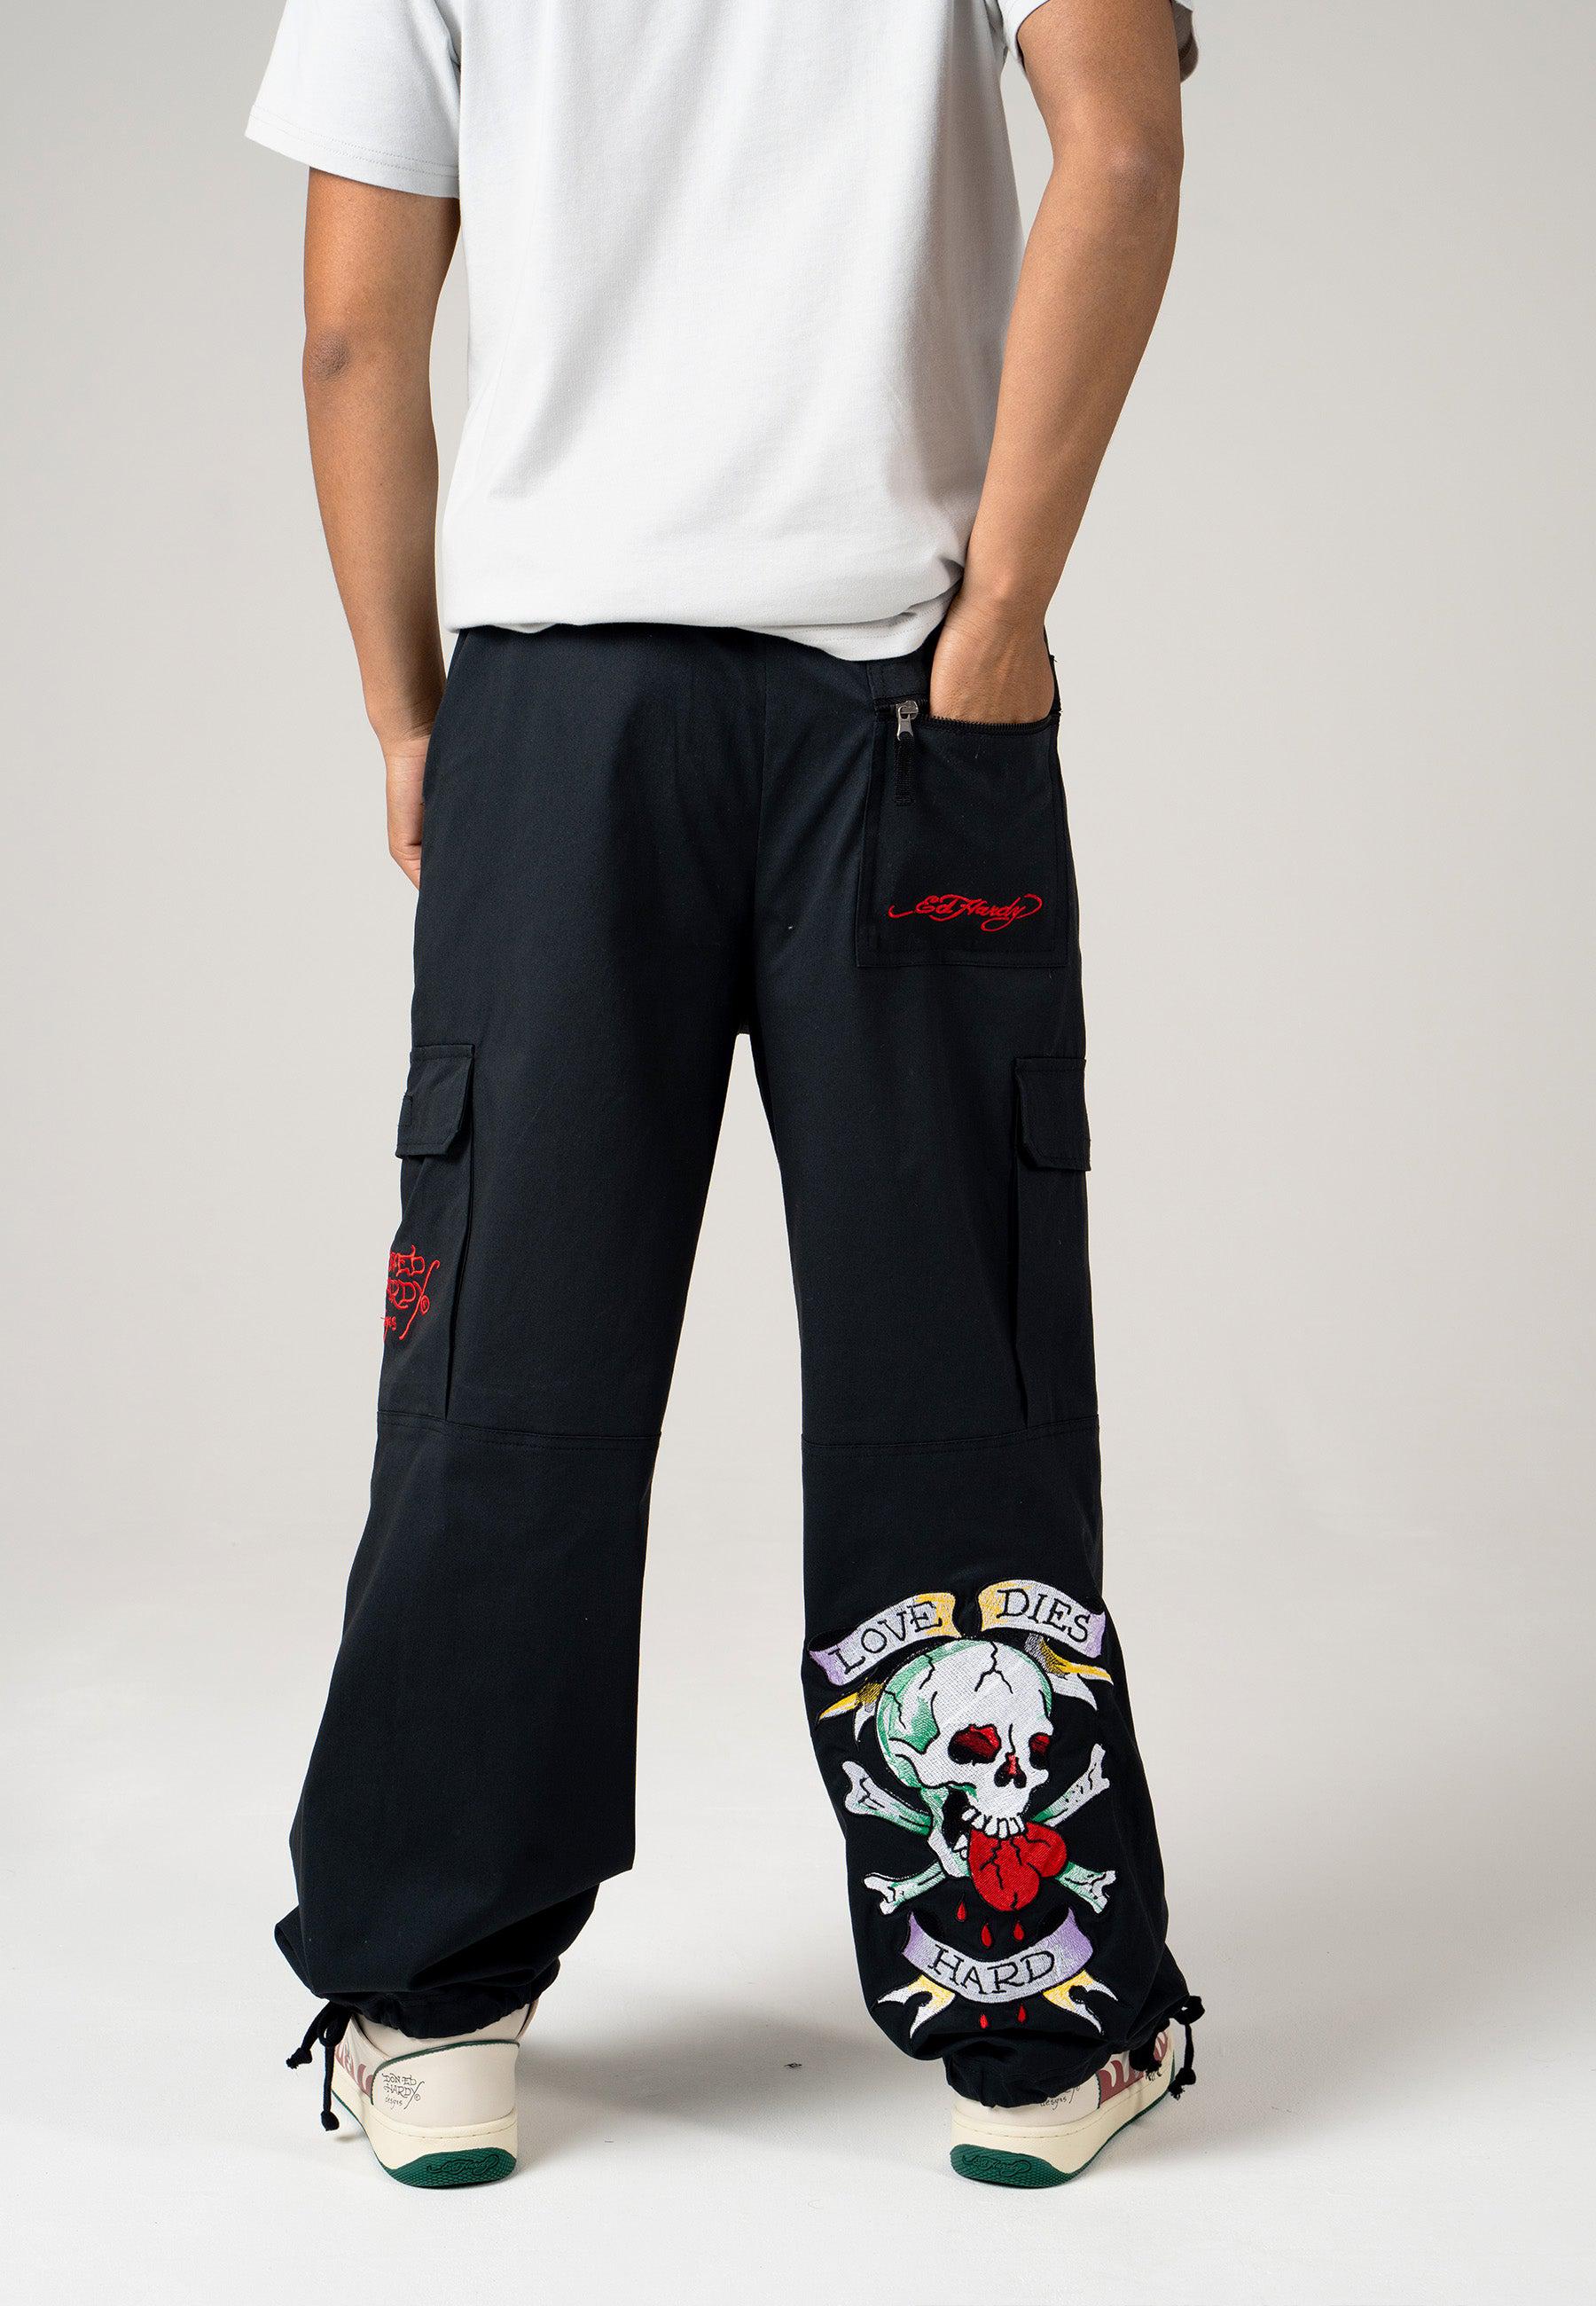 Mens Love Dies Hard Cargo Pants Trousers - Black – Ed Hardy Official